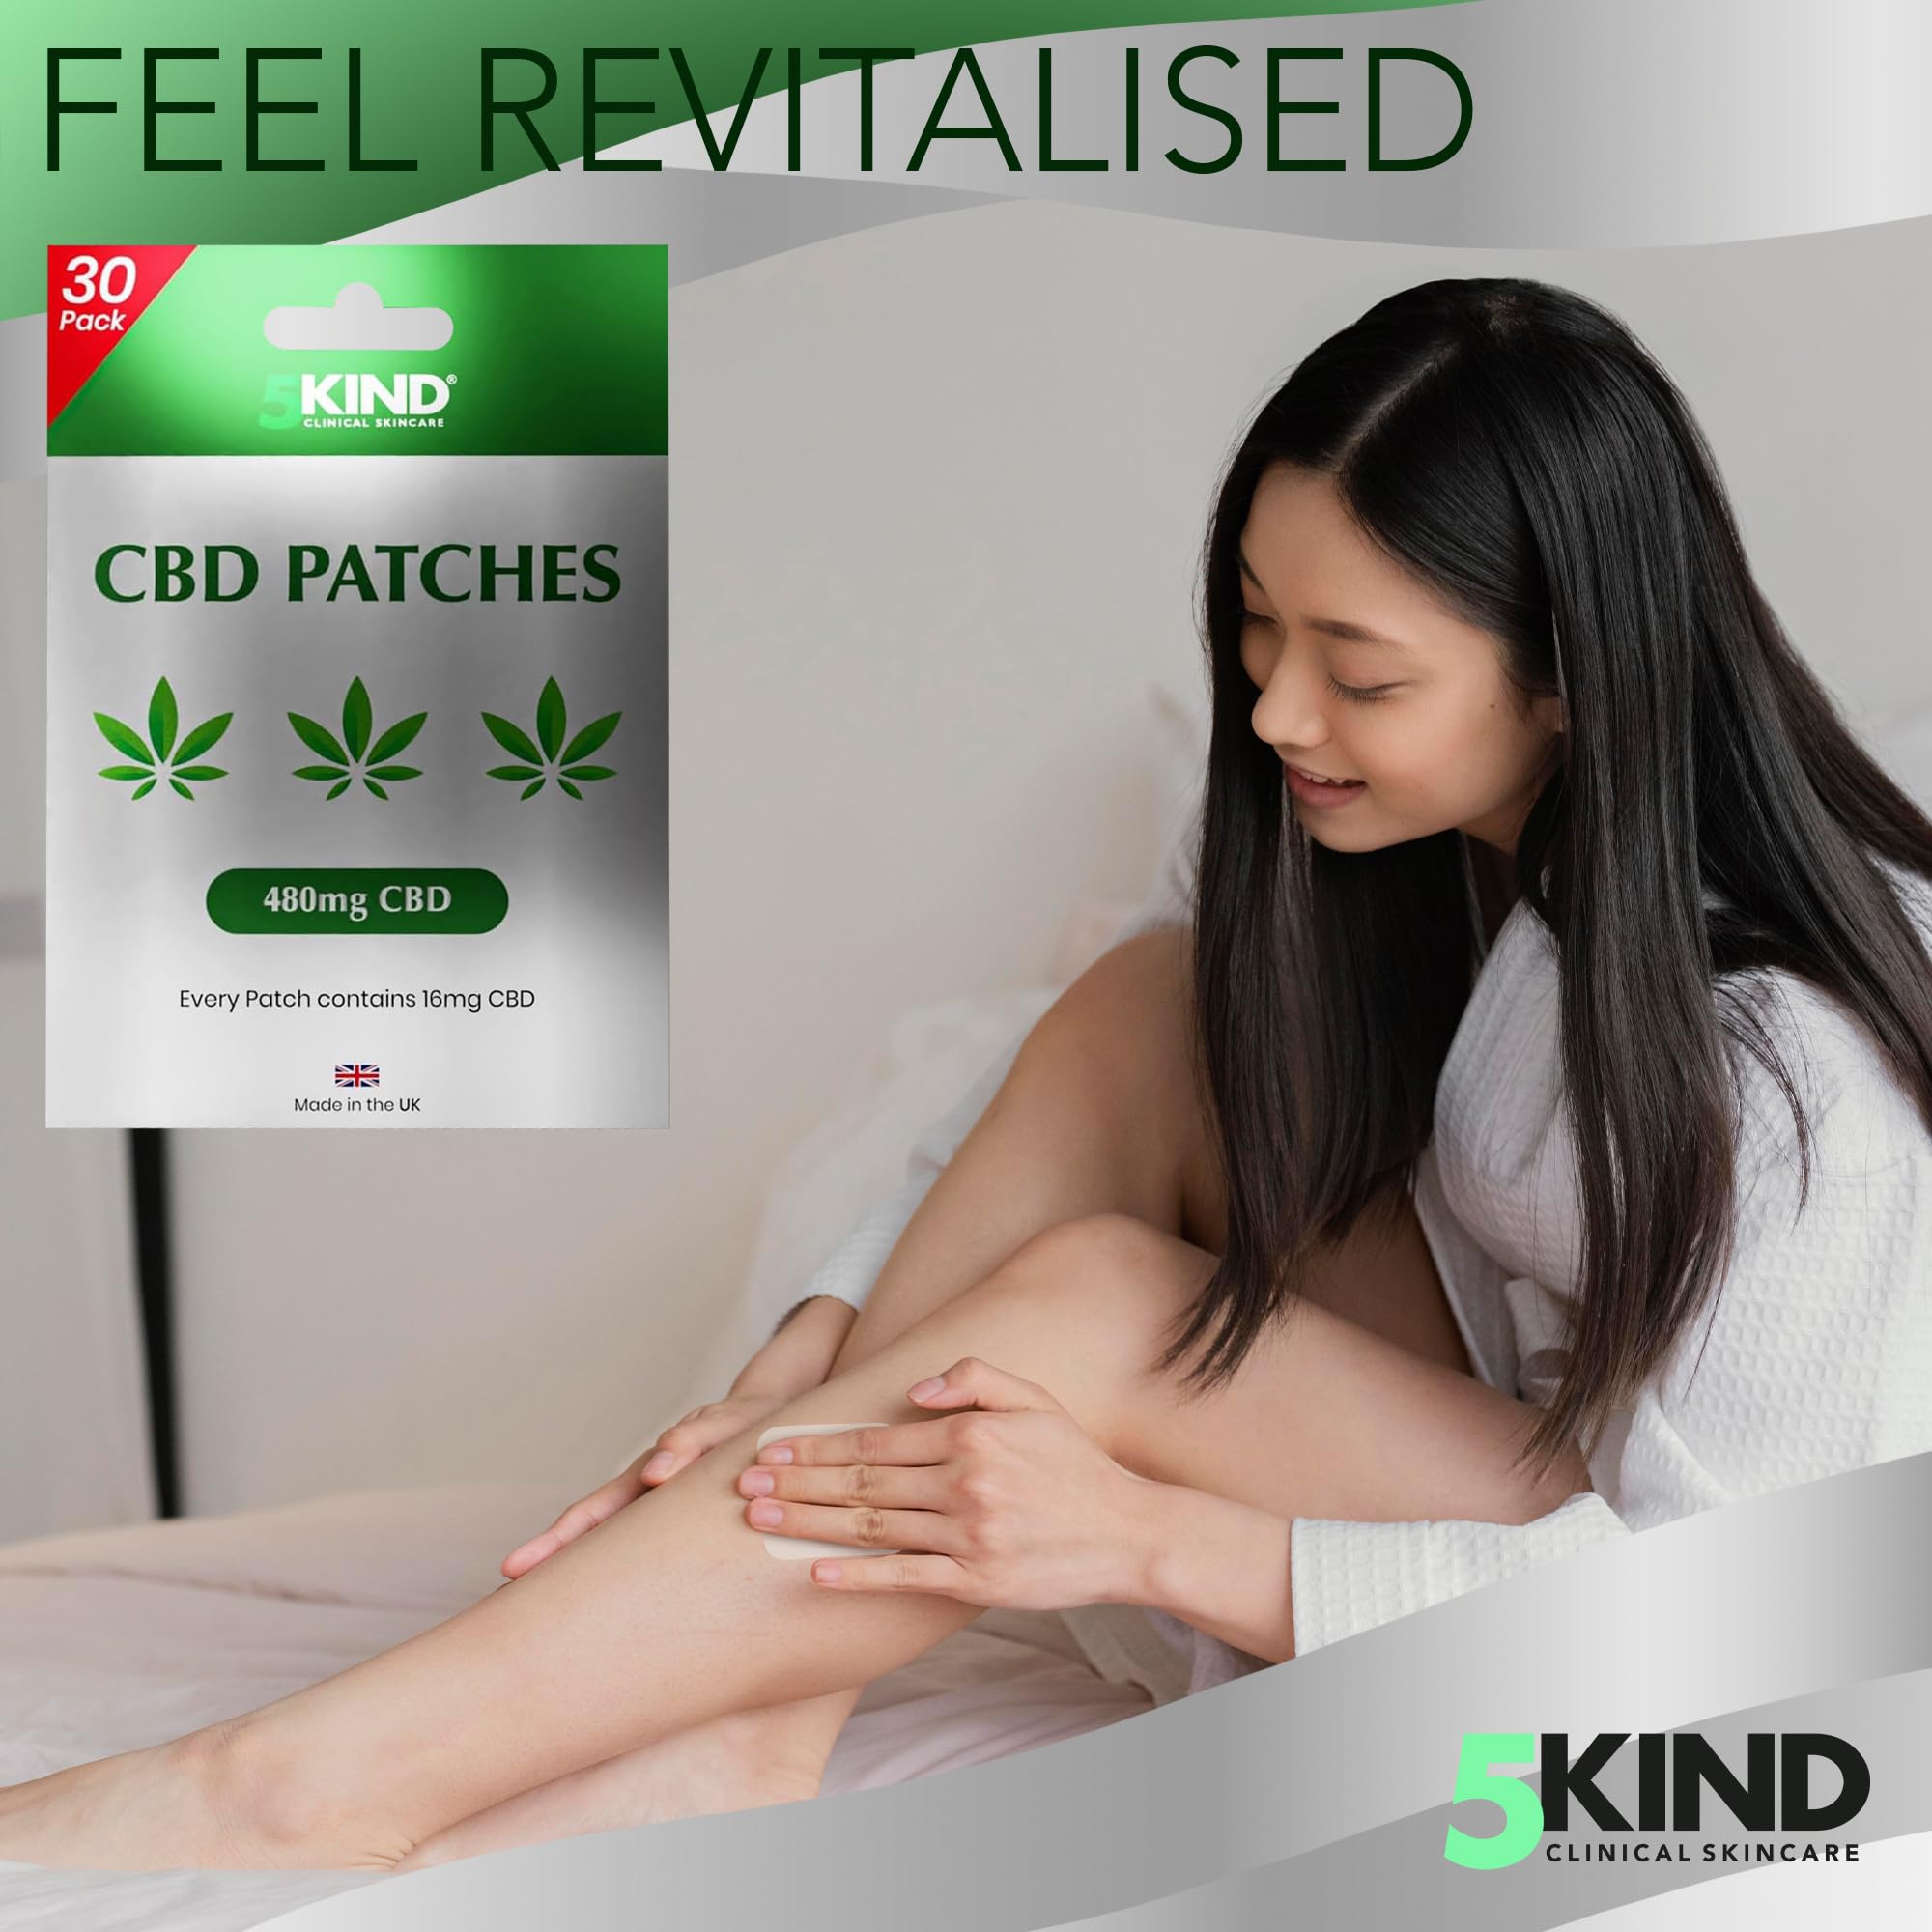 Pure CBD Patches 480mg - 16mg CBD in Every Patch - Calming Cannabidiol Patches - Natural Patch Made in UK